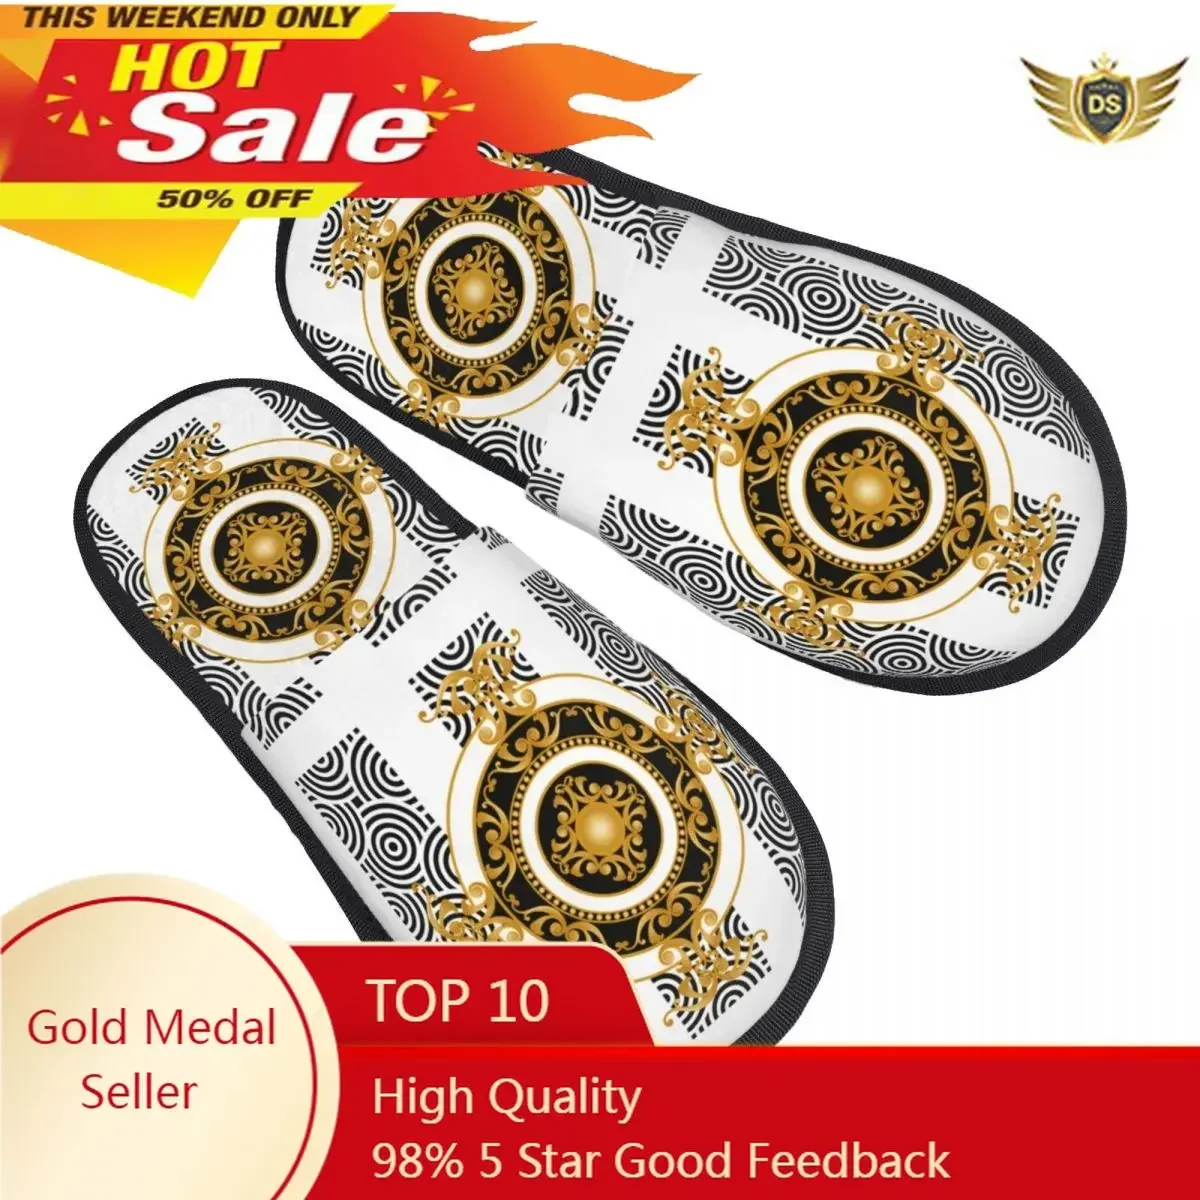 

Indoor Luxury Golden Baroque Warm Slippers Winter Home Plush Slippers Fashion Home Soft Fluffy Slippers